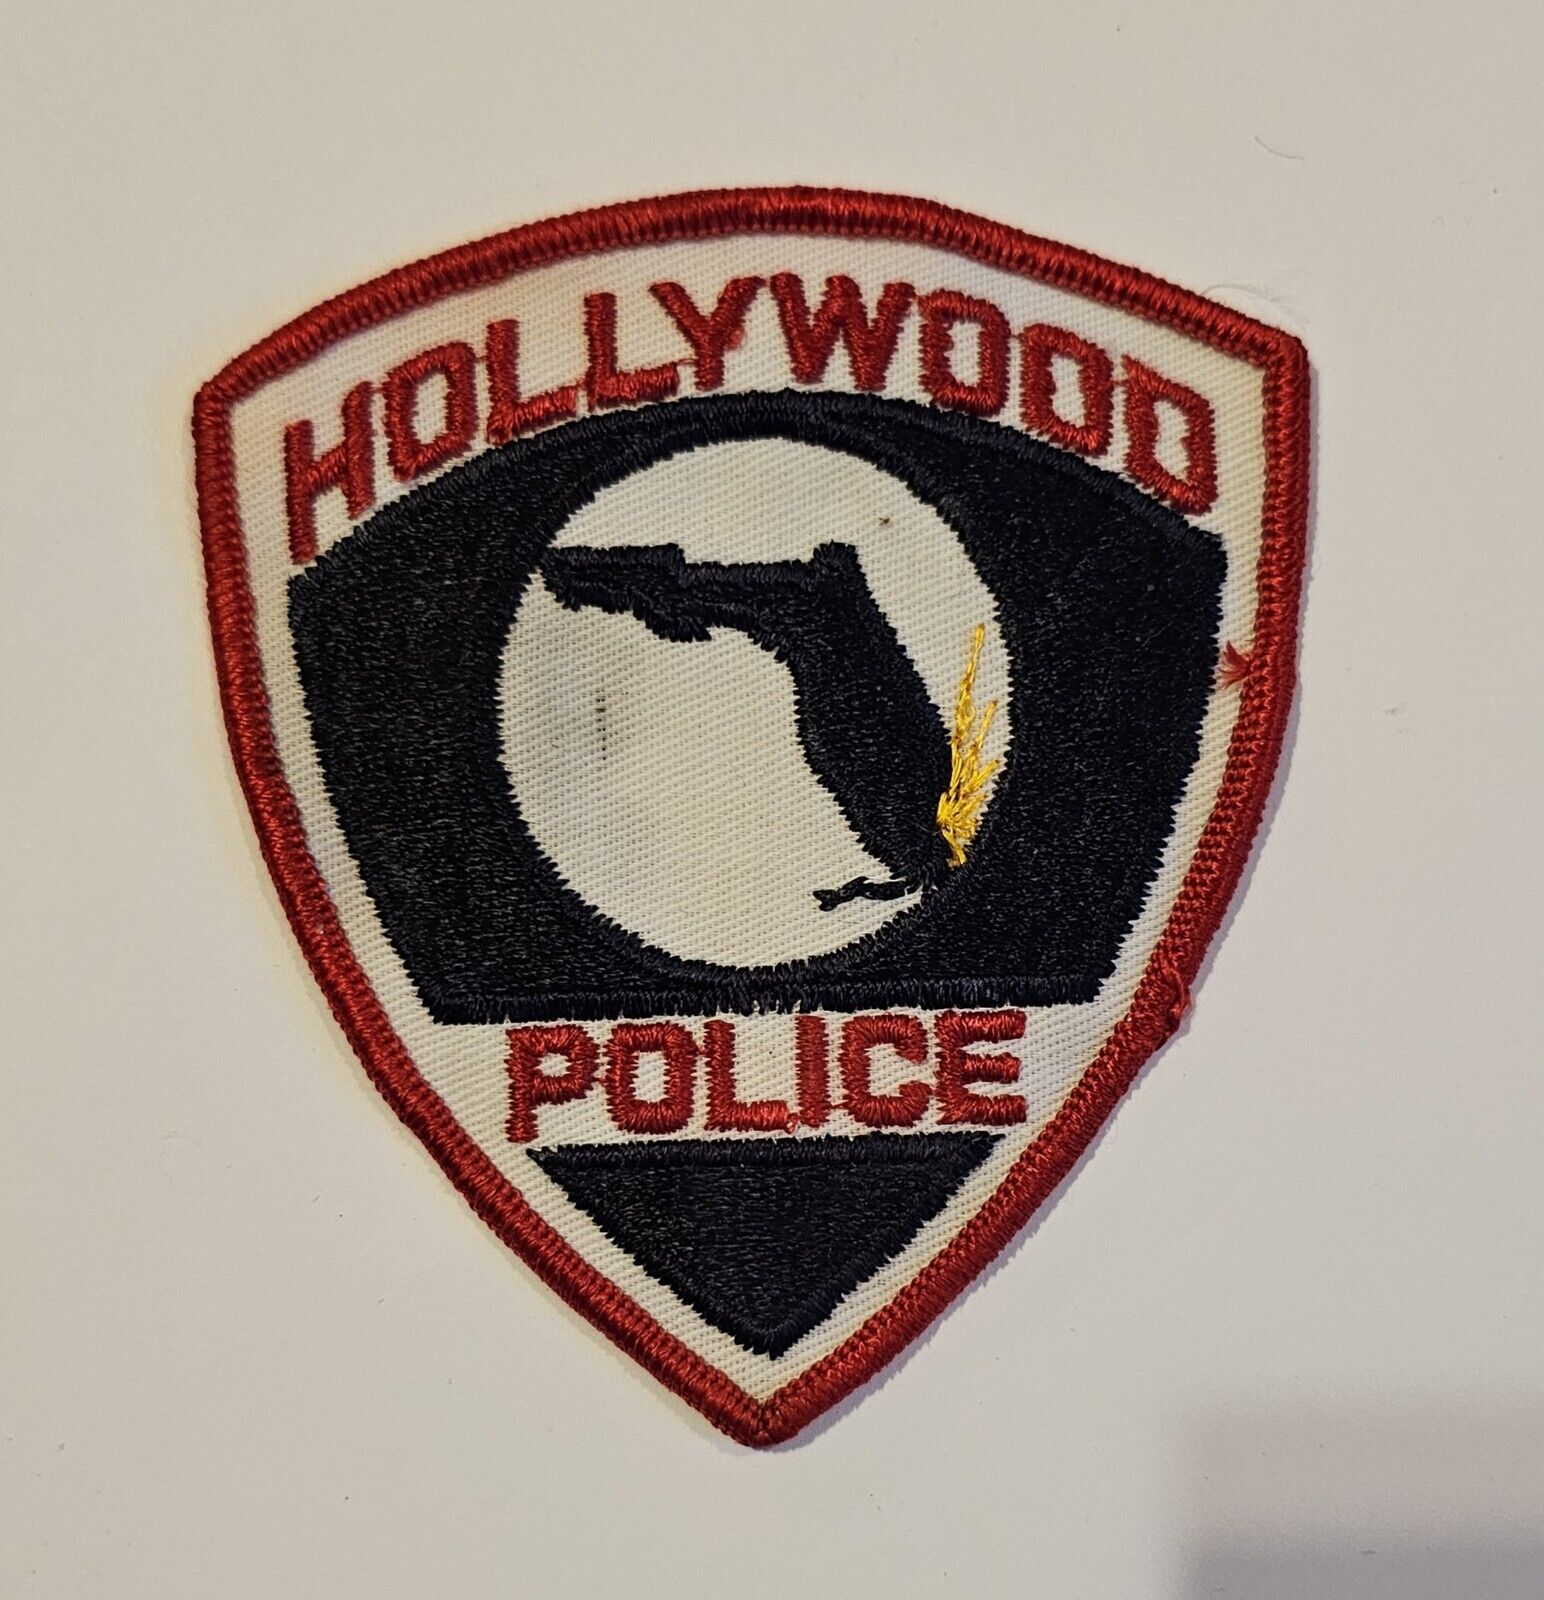 Vintage 1970s Hollywood Police Patch